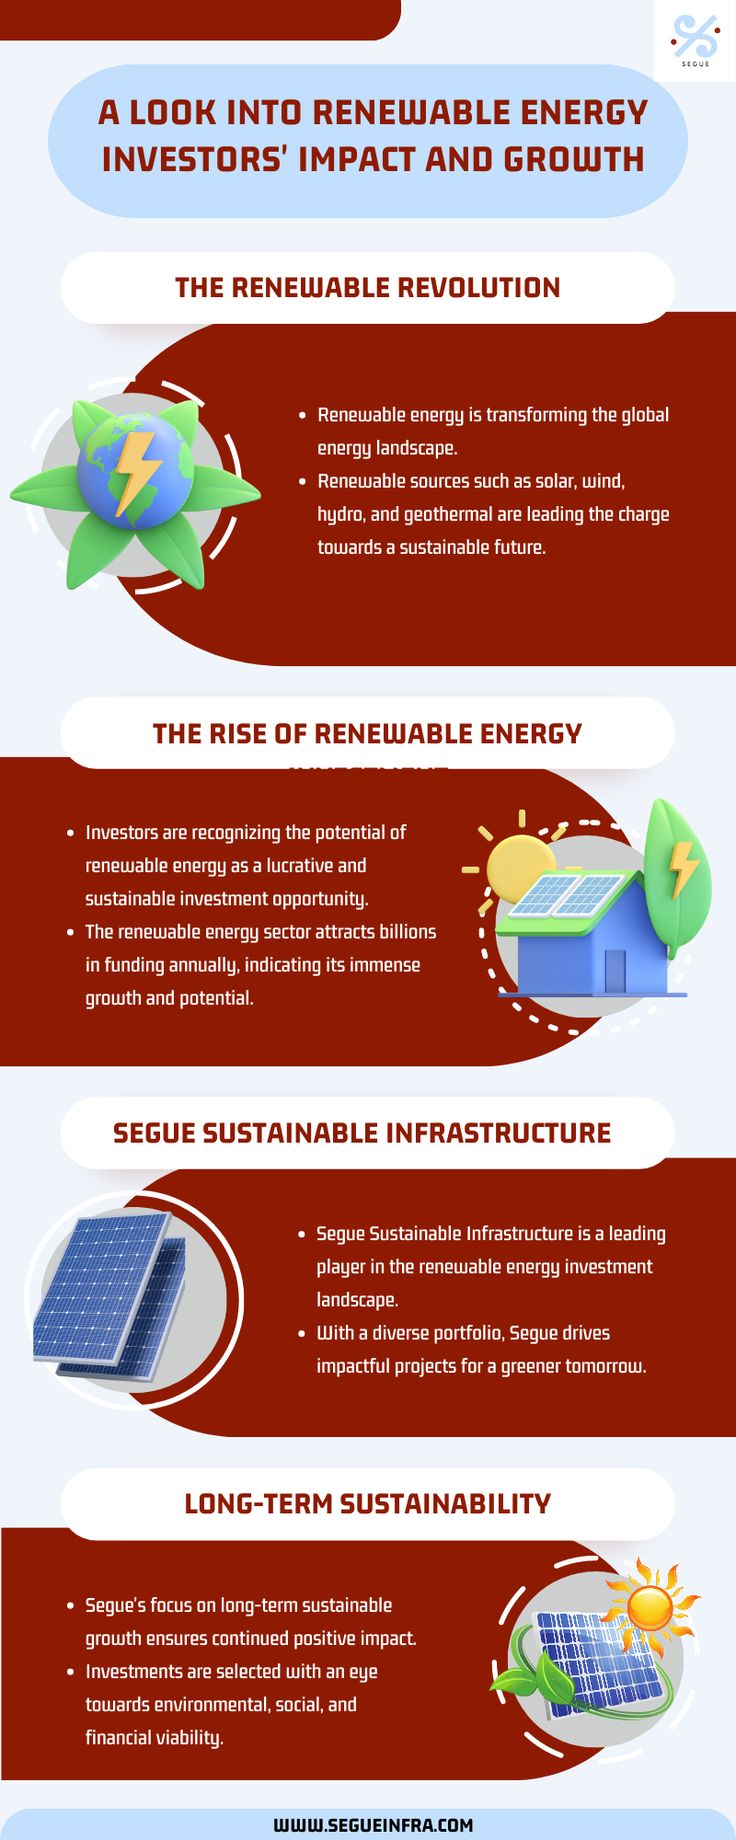 Pin on Segue Sustainable Infrastructure